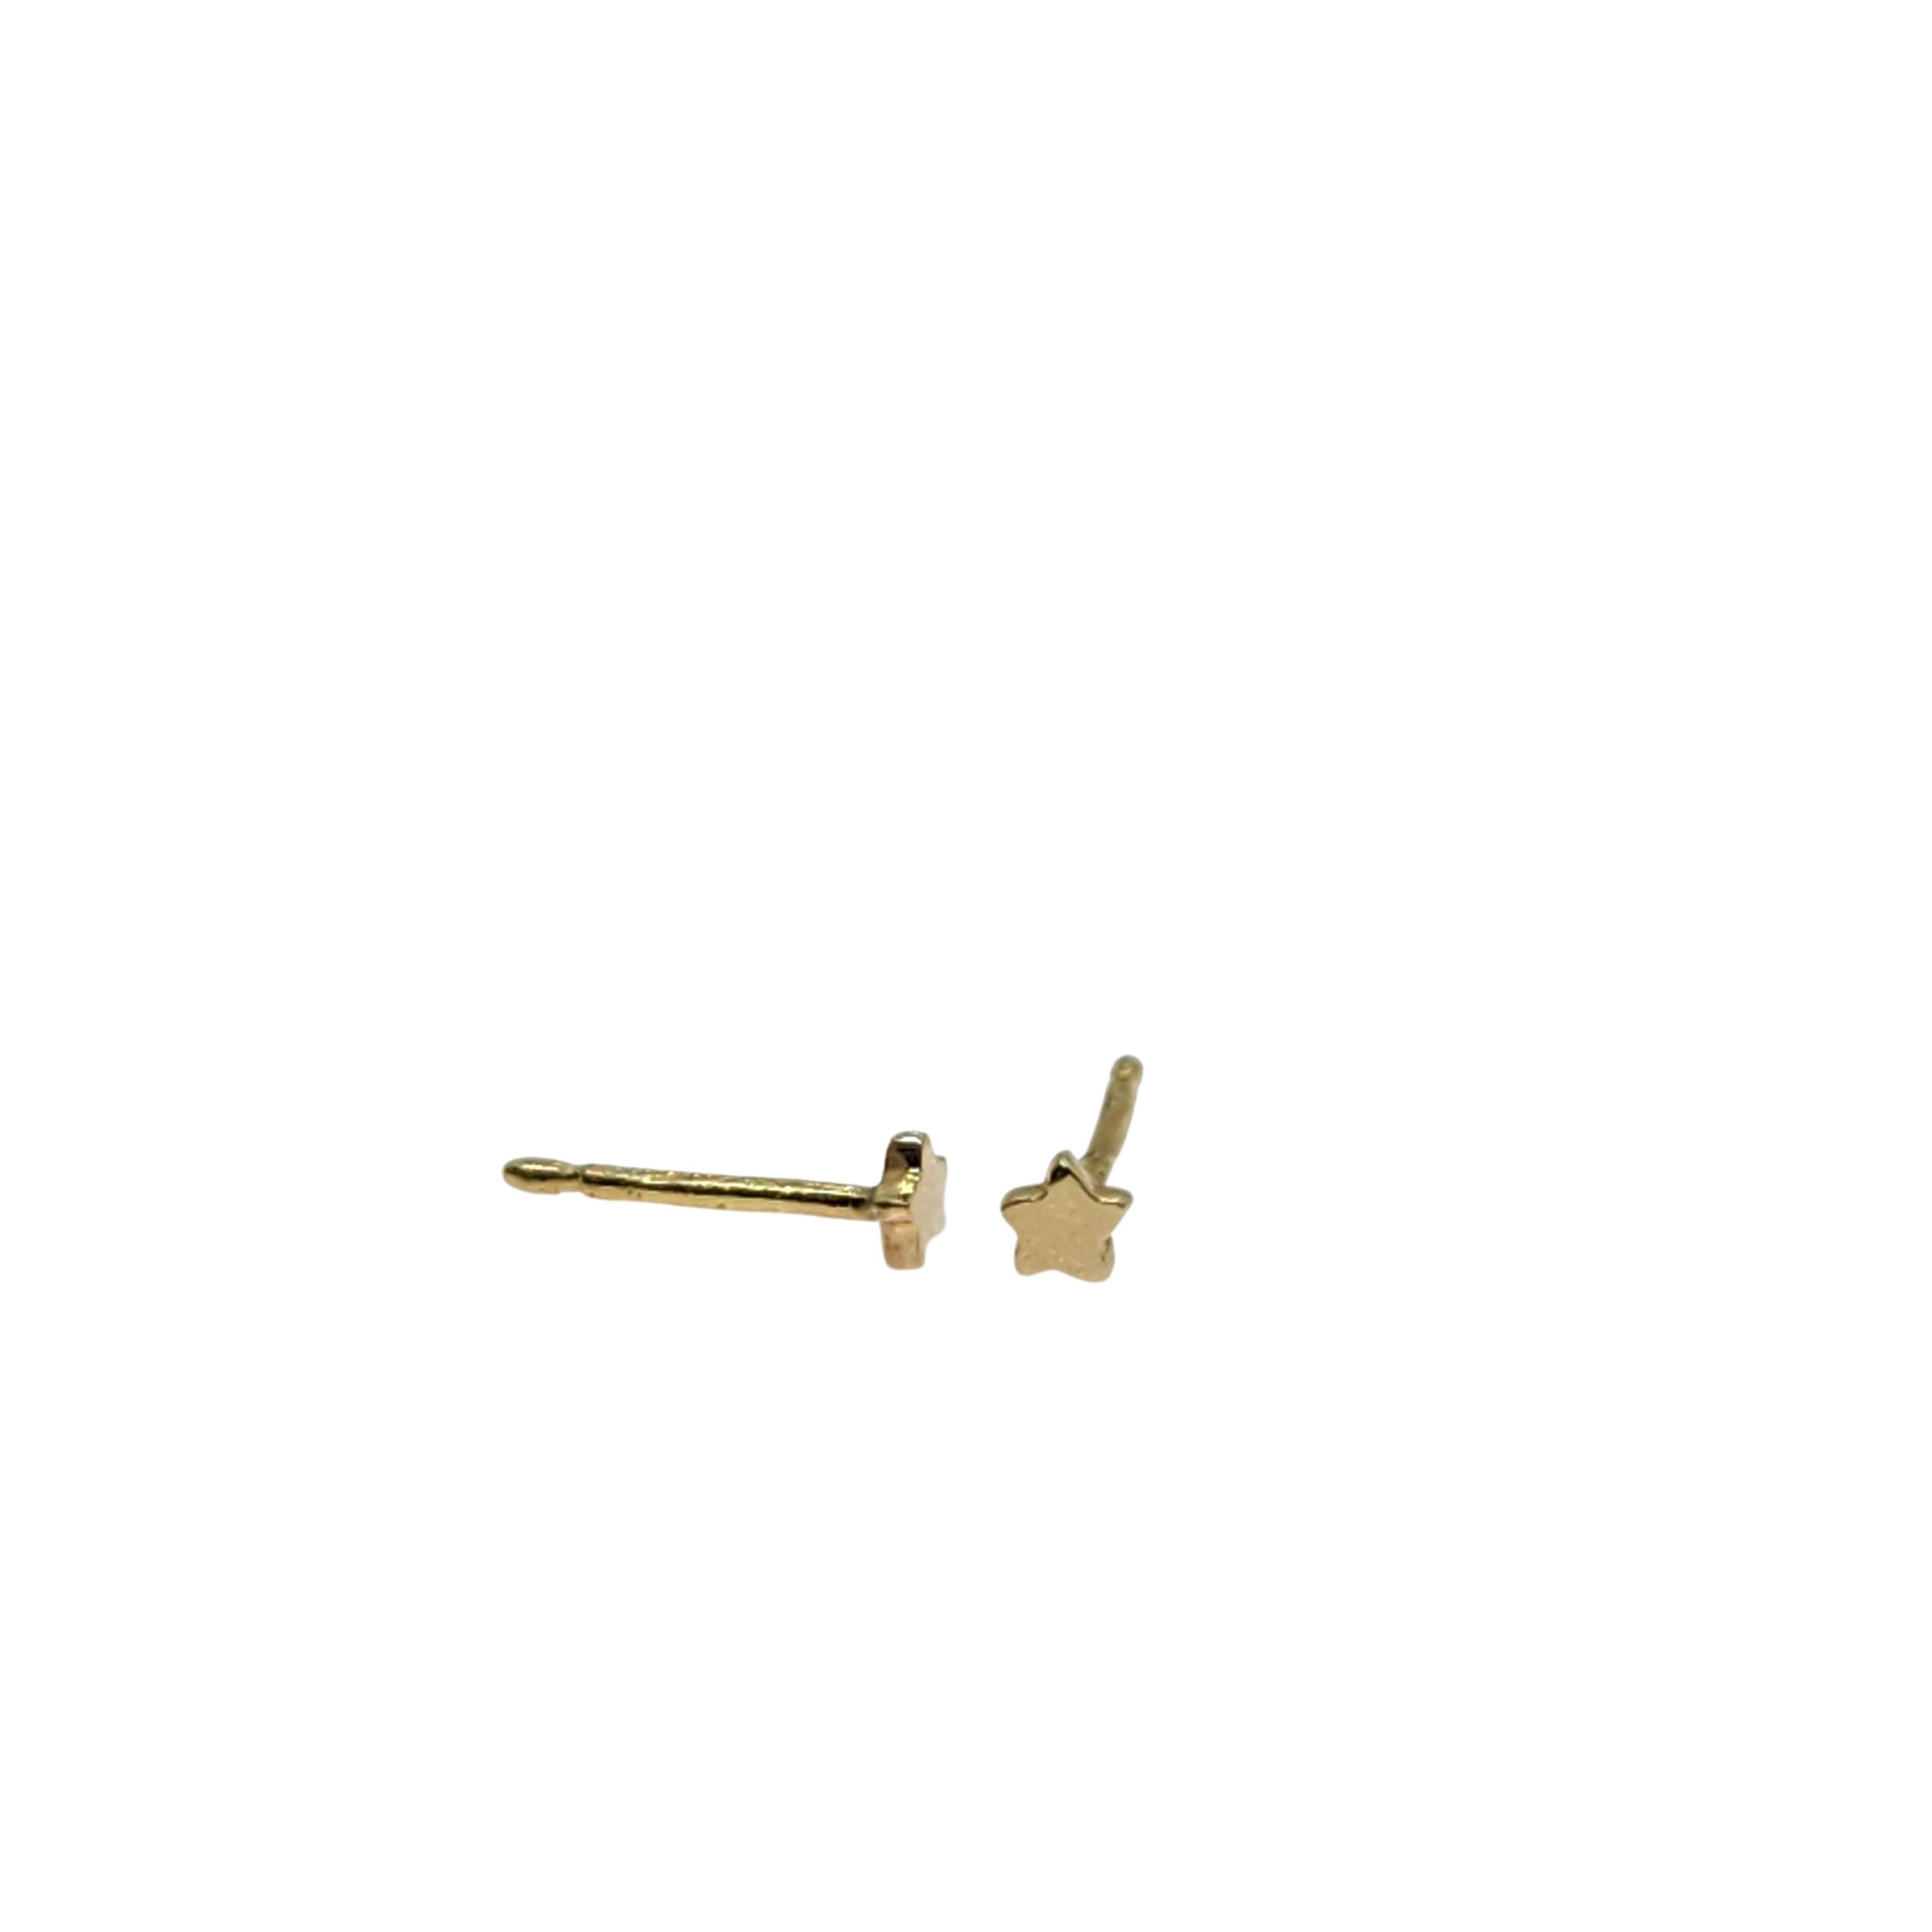 The Star Power Stud earrings are designed to be scattered on the ear. Of course singles or pairs can be worn in the warm tone of pure 18K gold. Mixes perfectly with any other earrings, studs, drops, hoops. In a mini size of 1/8 inch, they are easily